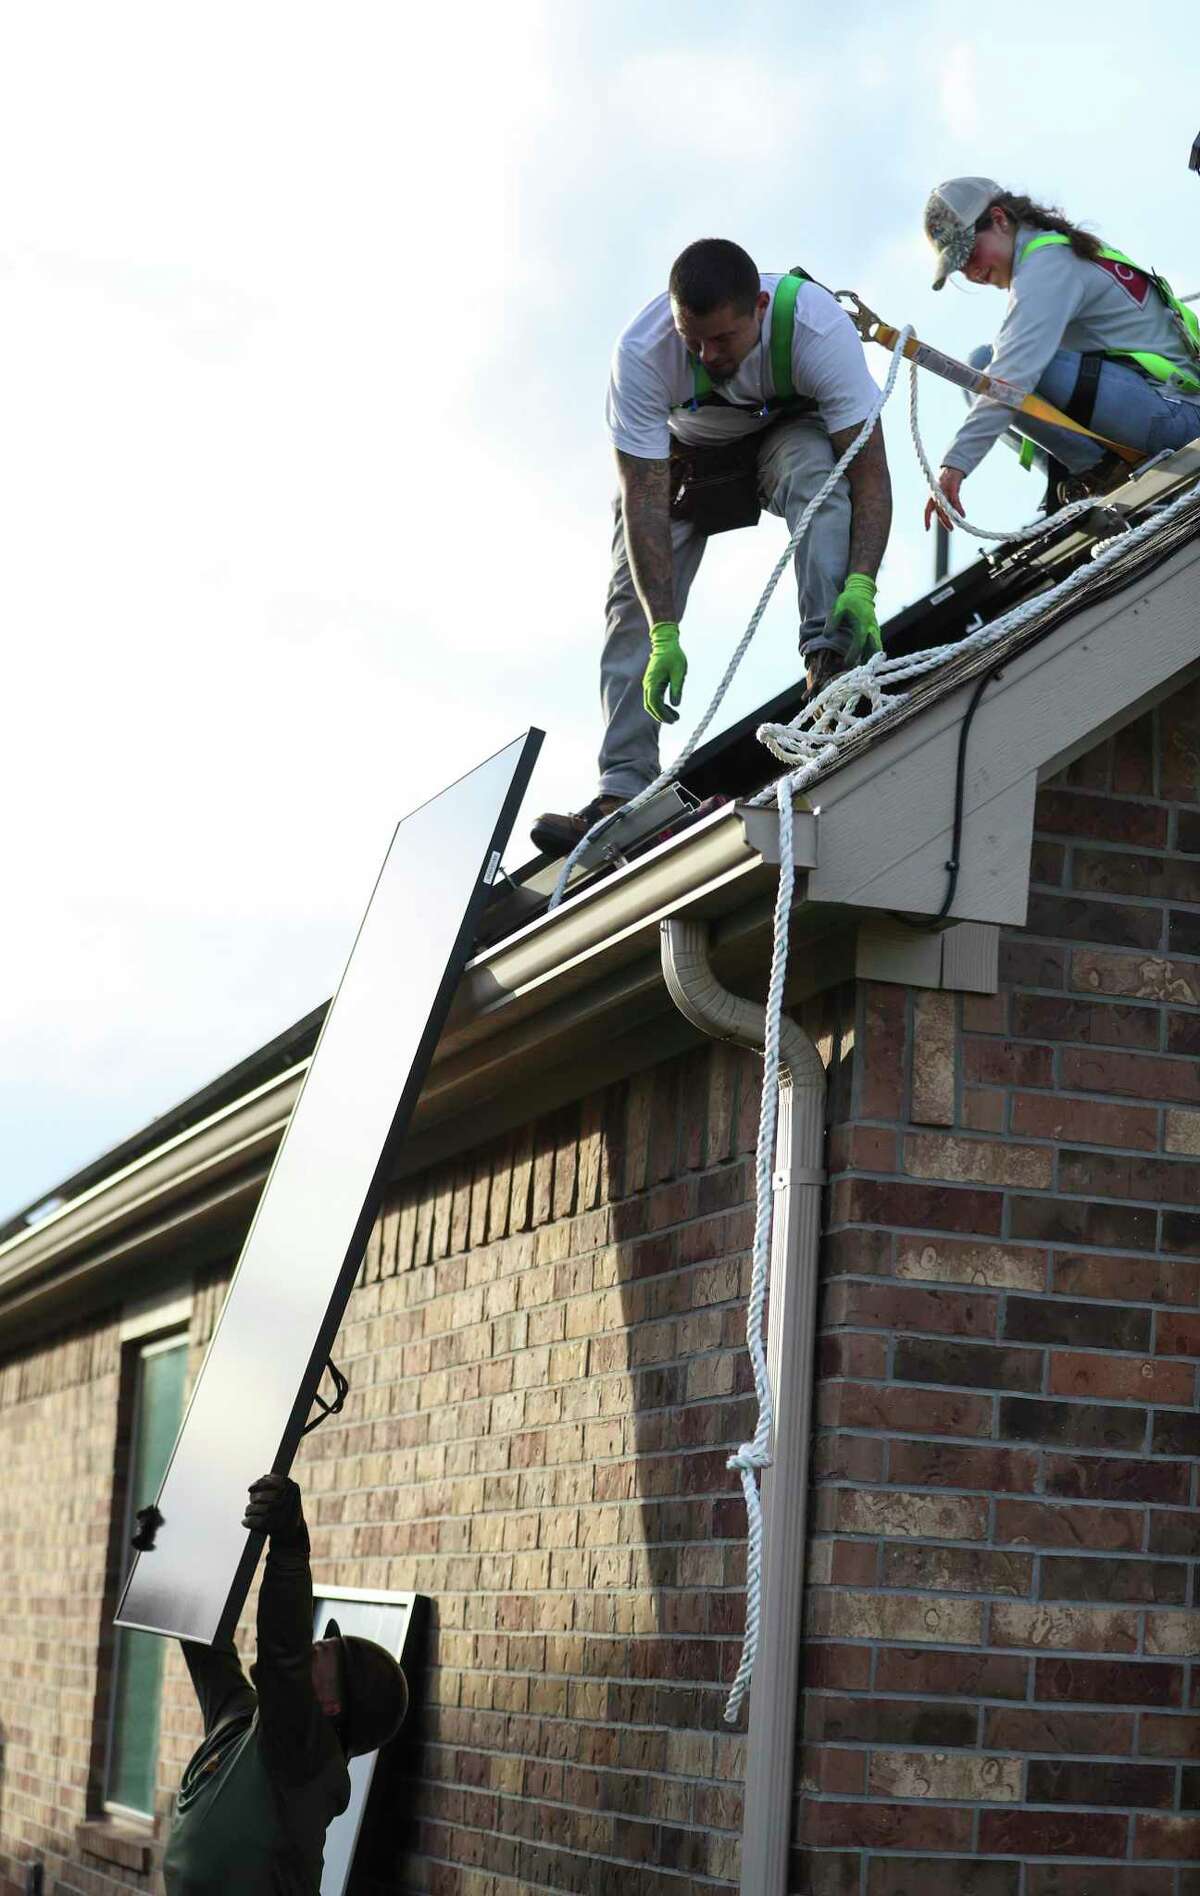 Steven Broussard hands Daniel Molina a solar panel as their team from Texas Solar Outfitters installed solar panels on a home, Friday, Dec. 17, 2021 in Cypress.